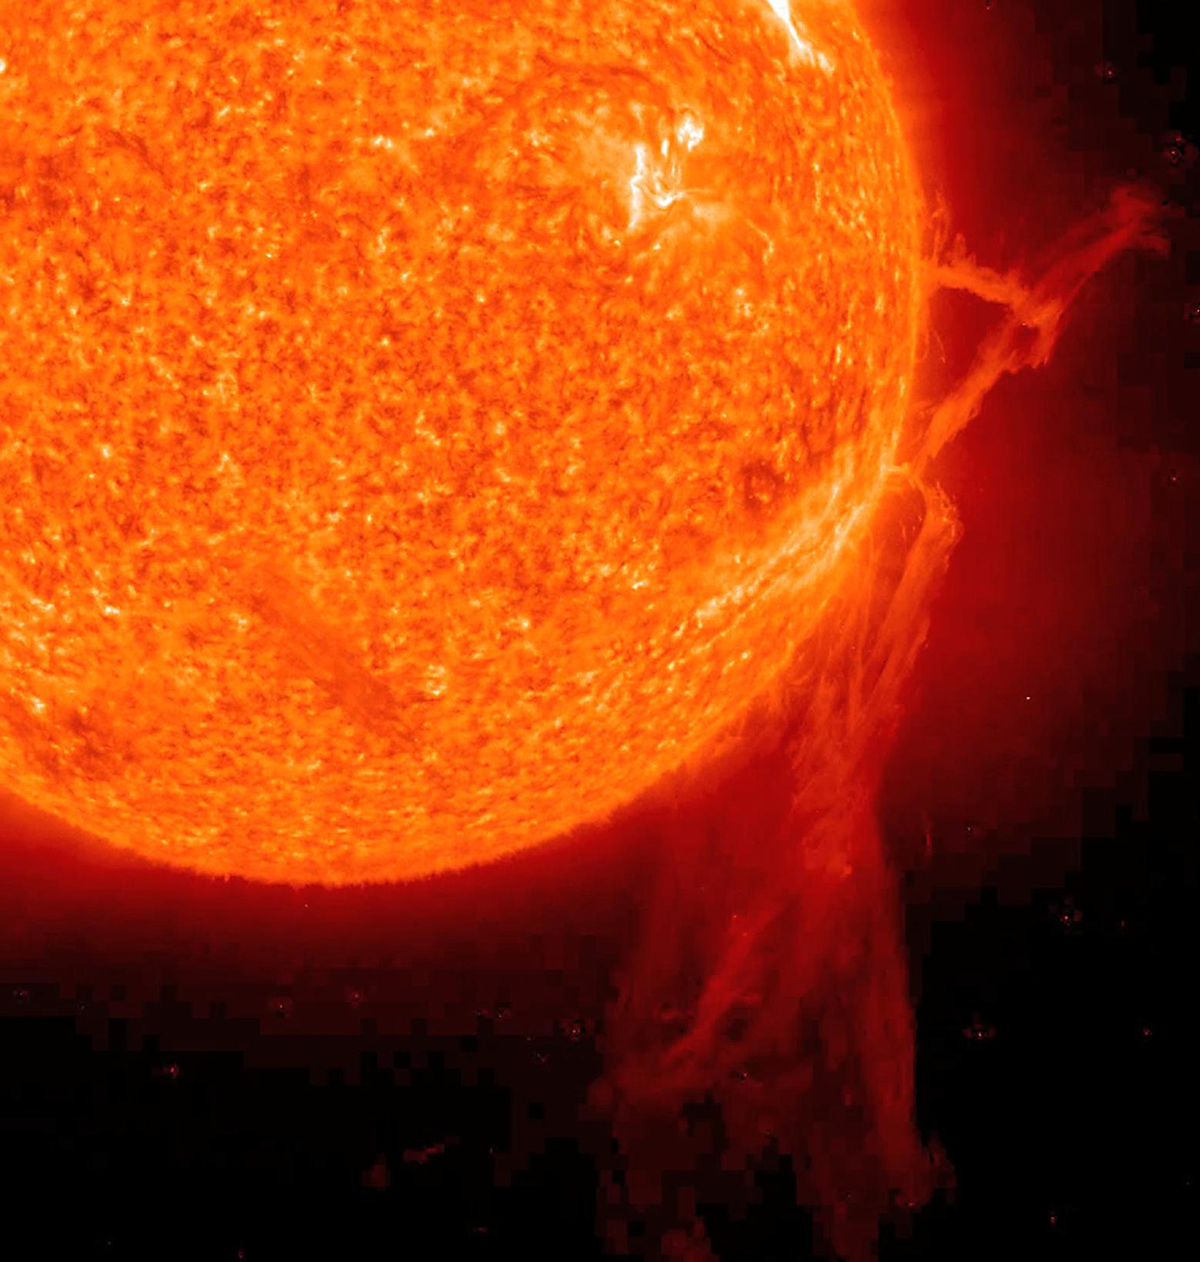 A very long solar filament that had been snaking around the Sun erupted (Dec. 6, 2010) with a flourish. STEREO (Behind) caught the action in dramatic detail in extreme ultraviolet light of Helium. It had been almost a million km long (about half a solar radius) and a prominent feature on the Sun visible over two weeks earlier before it rotated out of view. Filaments, elongated clouds of cooler gases suspended above the Sun by magnetic forces, are rather unstable and often break away from the Sun. Credit: NASA/GSFC/SOHO NASA